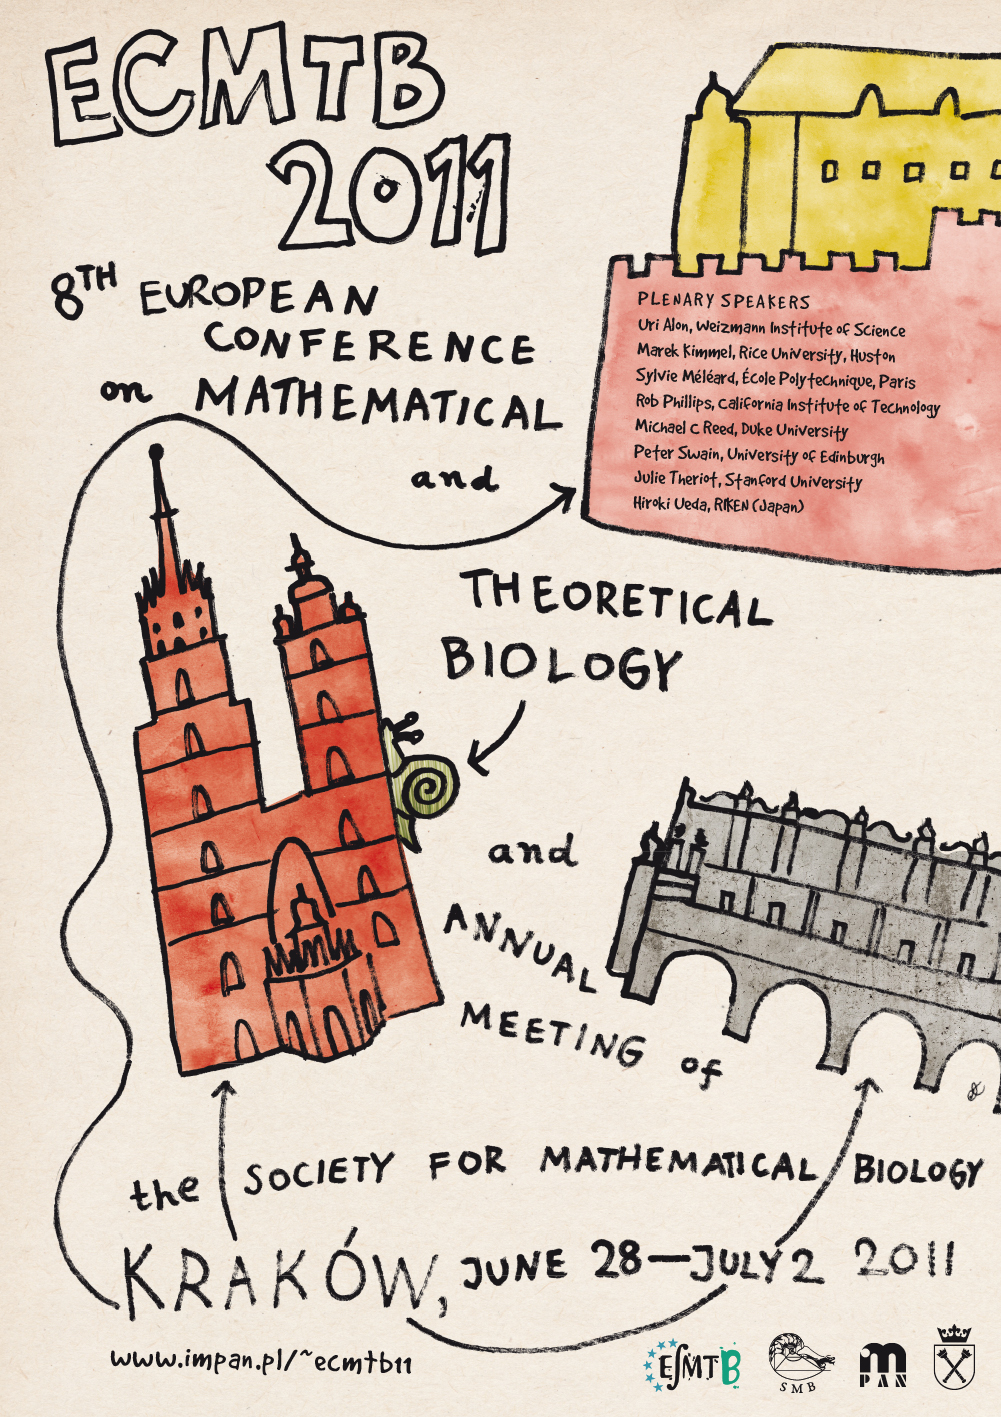 Mathematical and Theoretical Biology